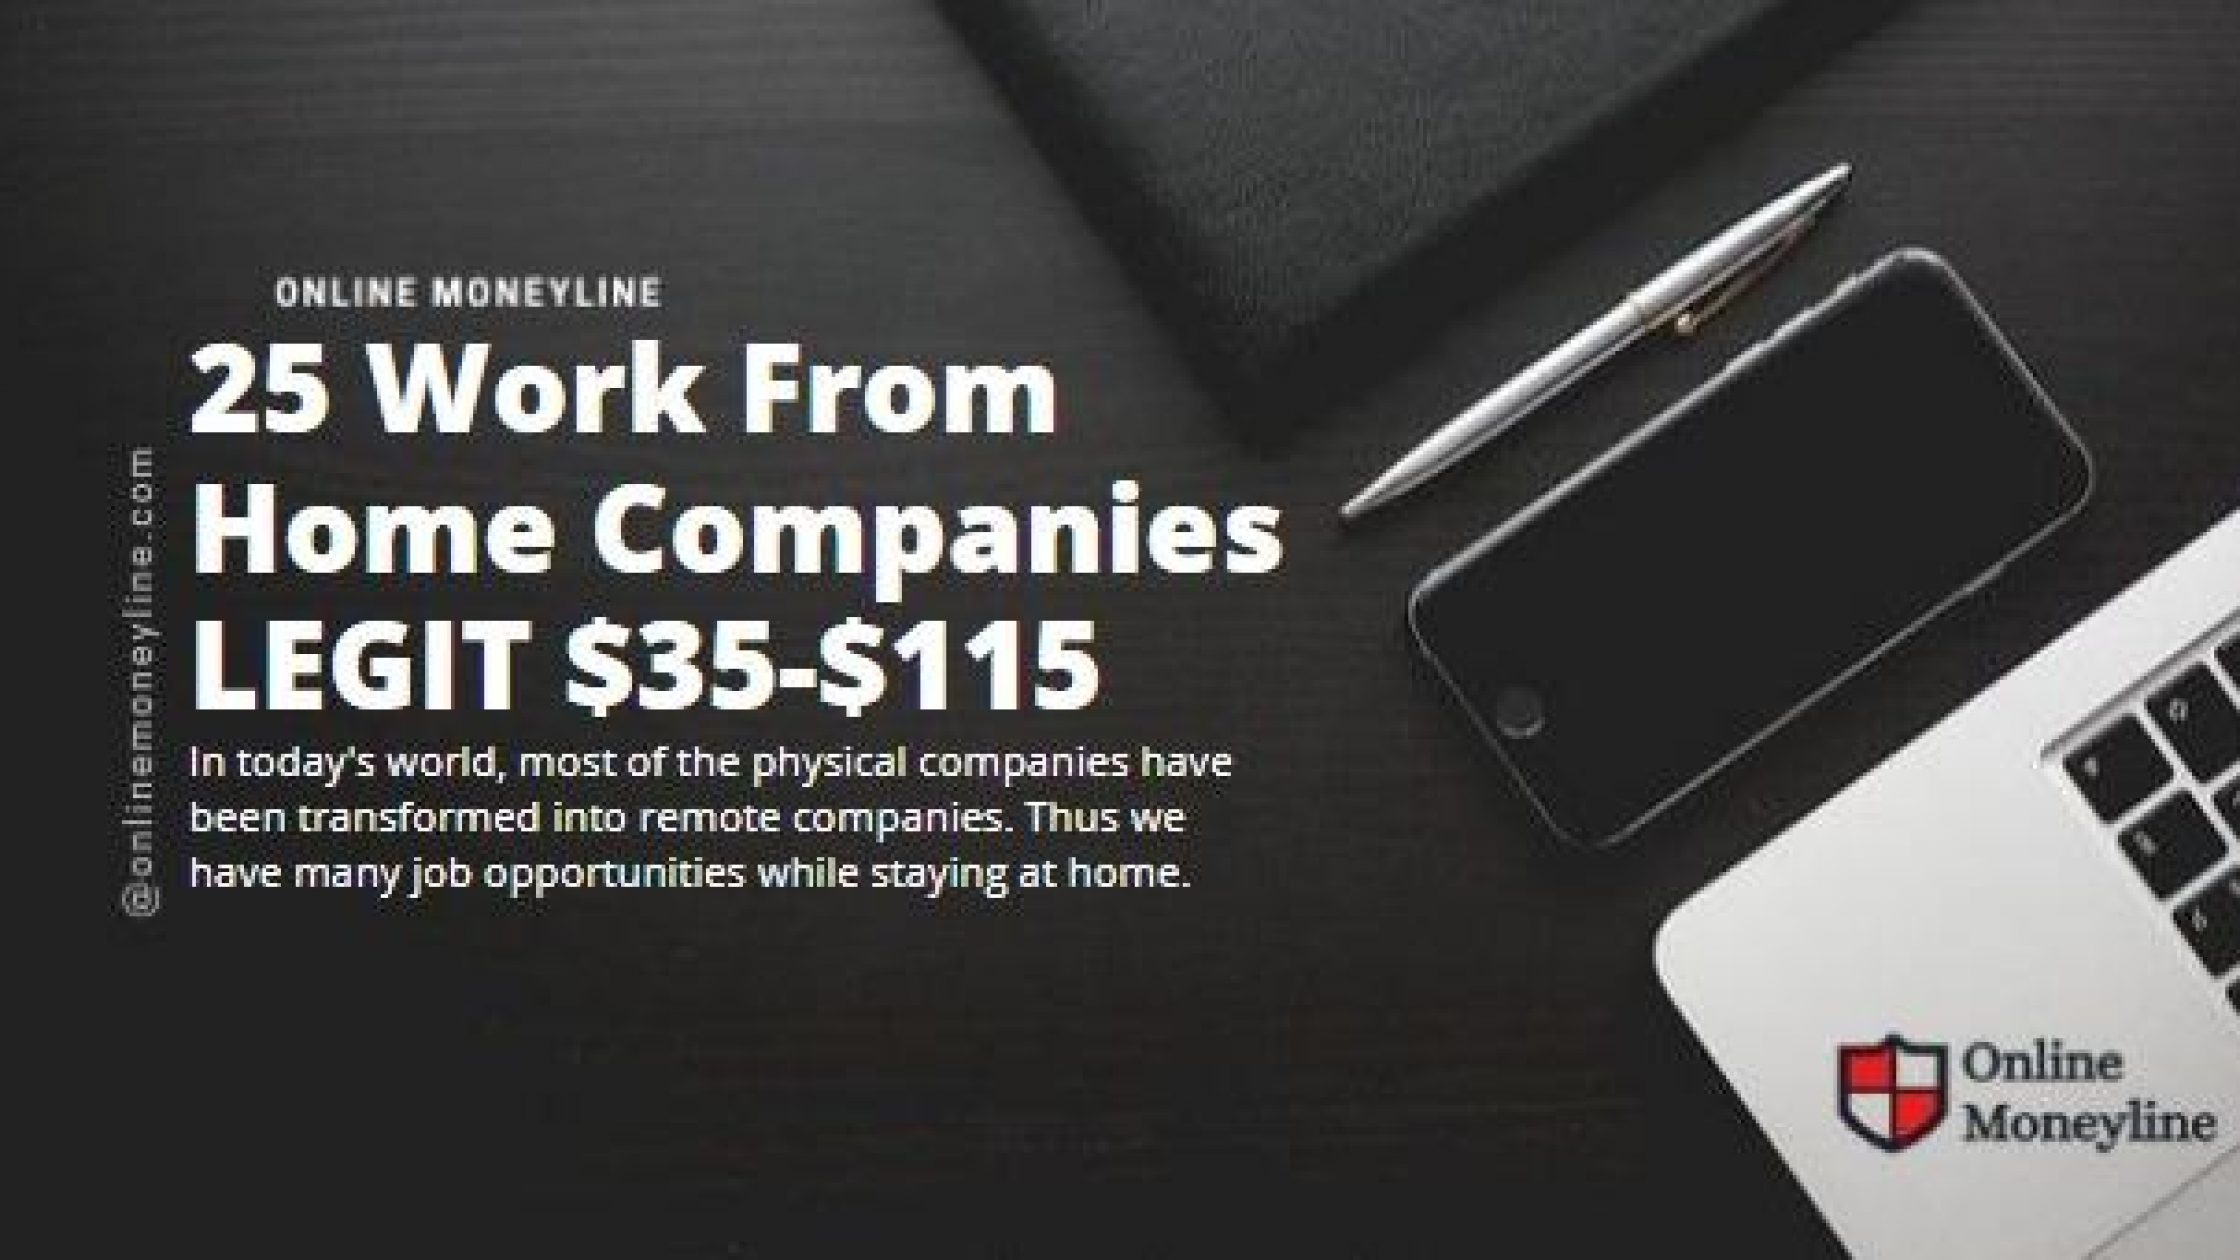 25 Work From Home Companies LEGIT $35-$115